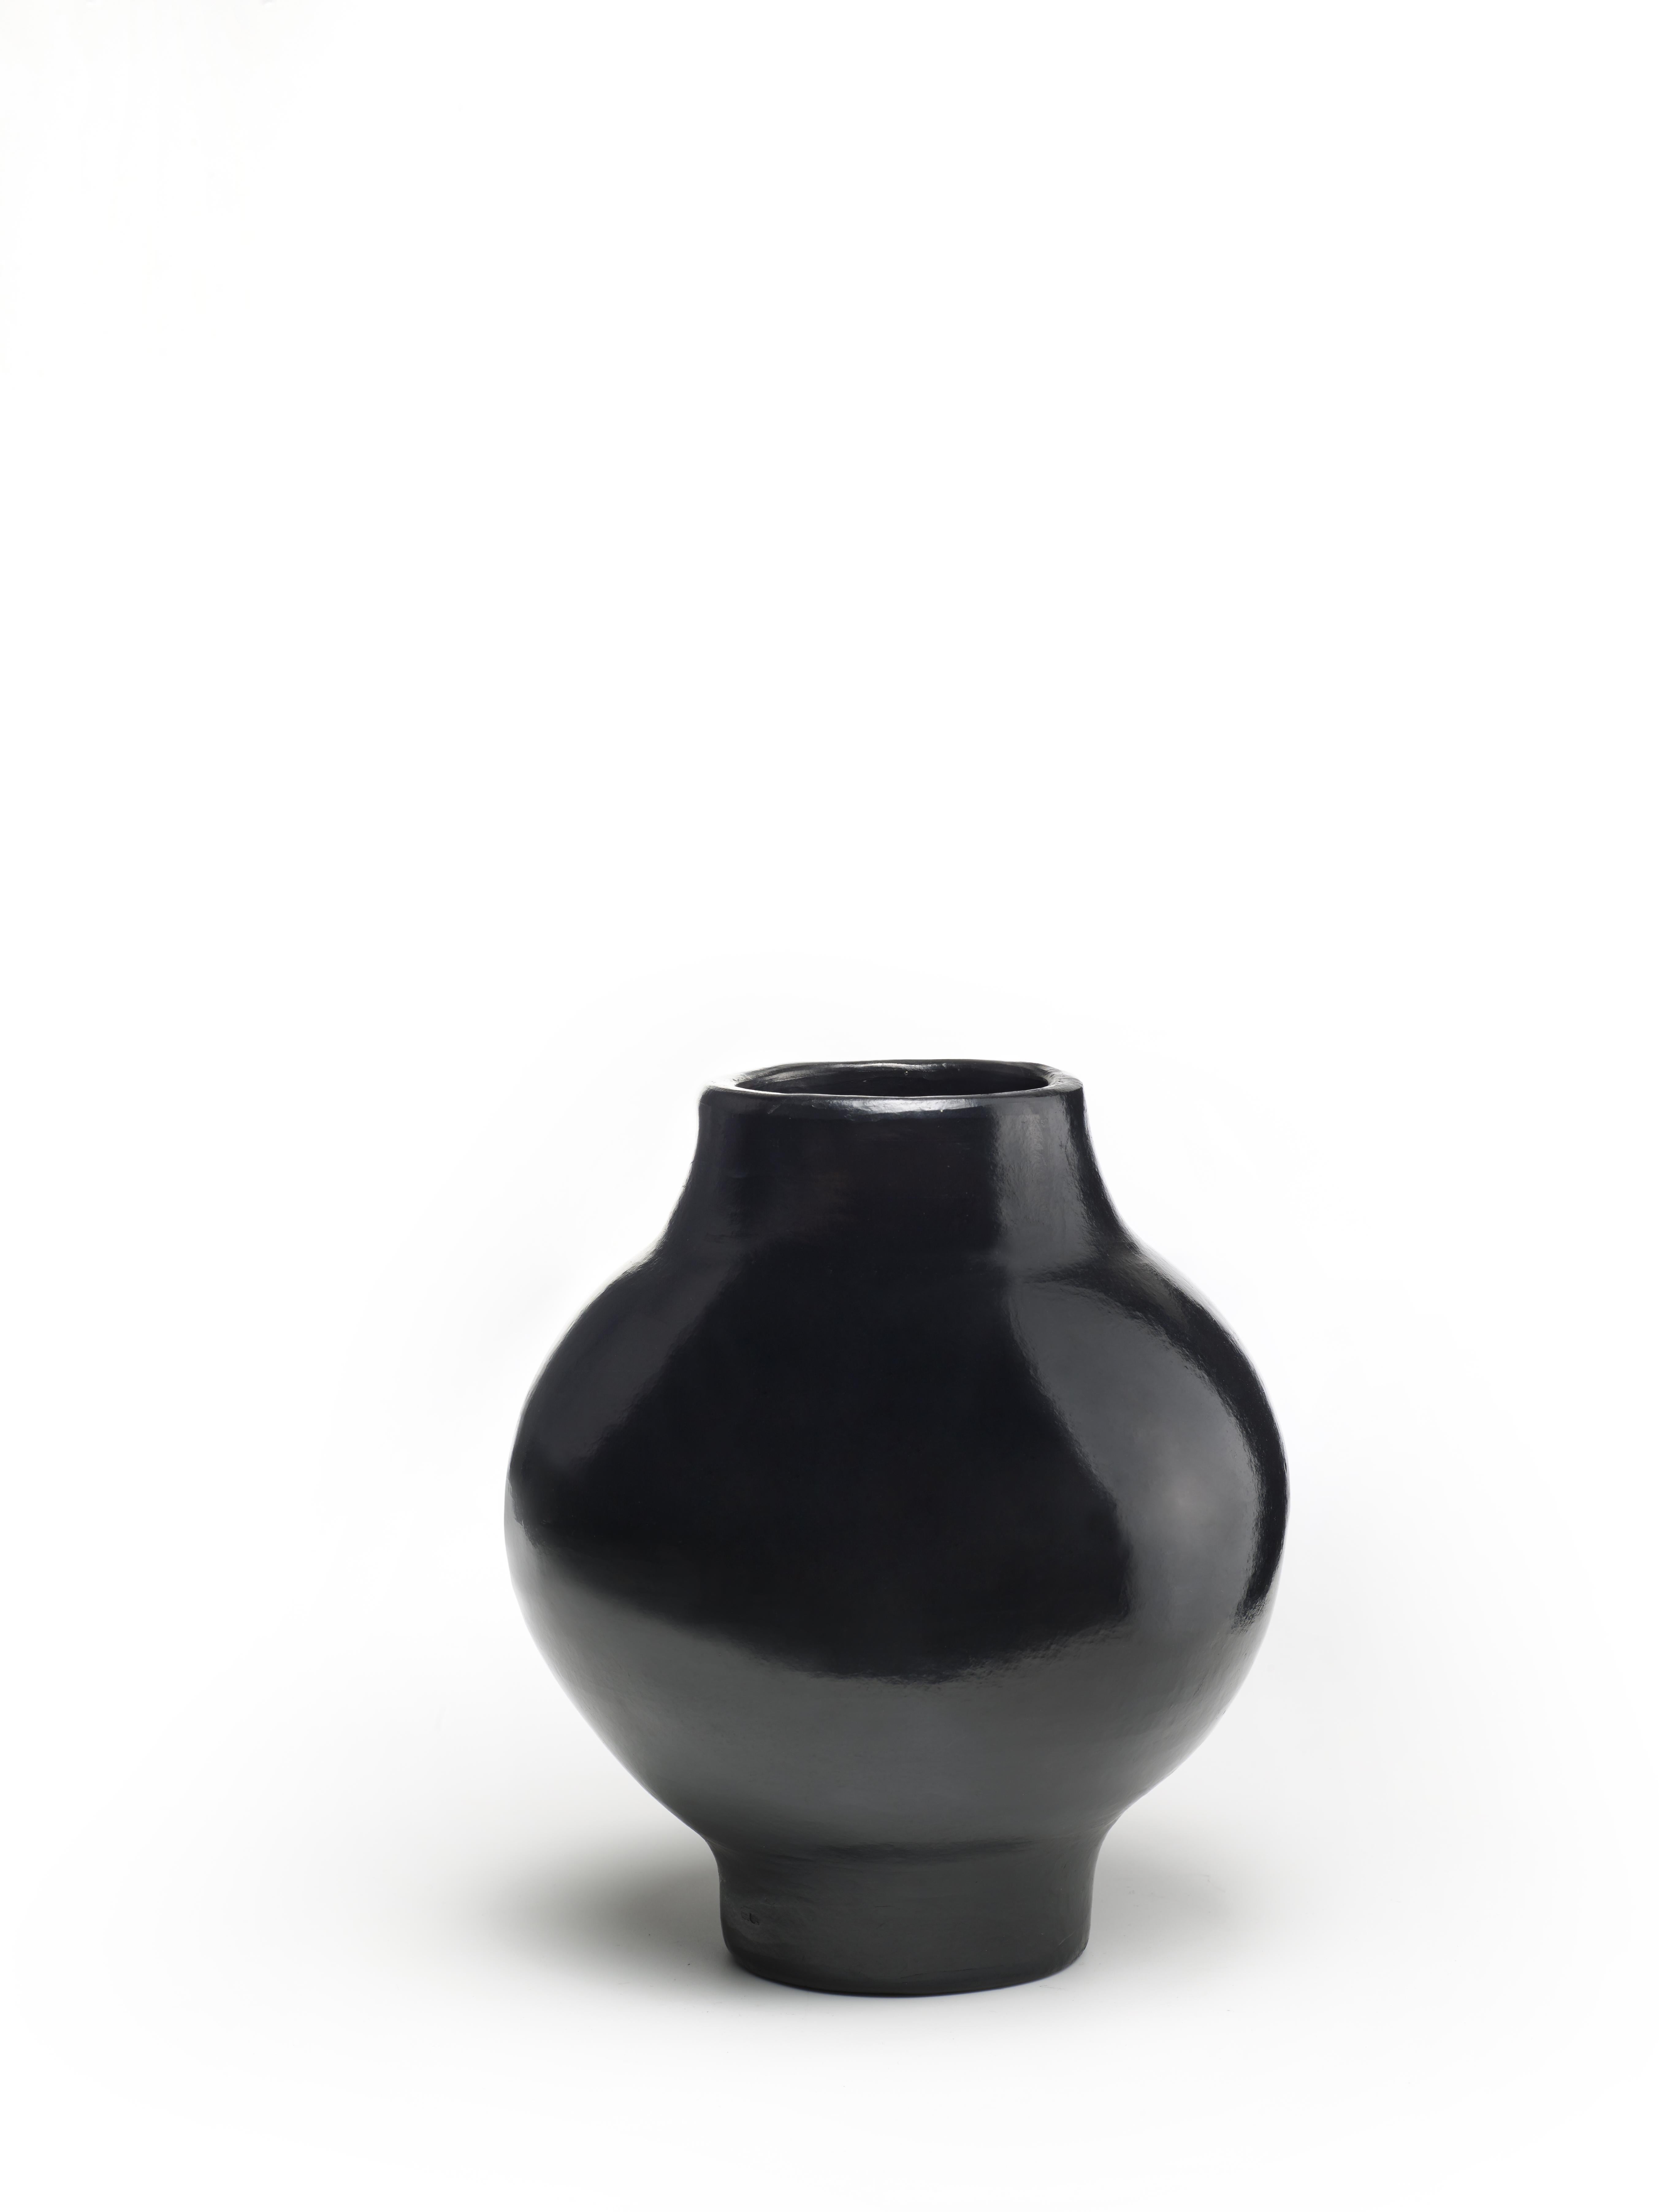 Mini Vase by Sebastian Herkner
Materials: Heat-resistant black ceramic. 
Technique: Glazed. Oven cooked and polished with semi-precious stones. 
Dimensions: Diameter 16 cm x H 19 cm 
Available in sizes large and small.

This pot belongs to the